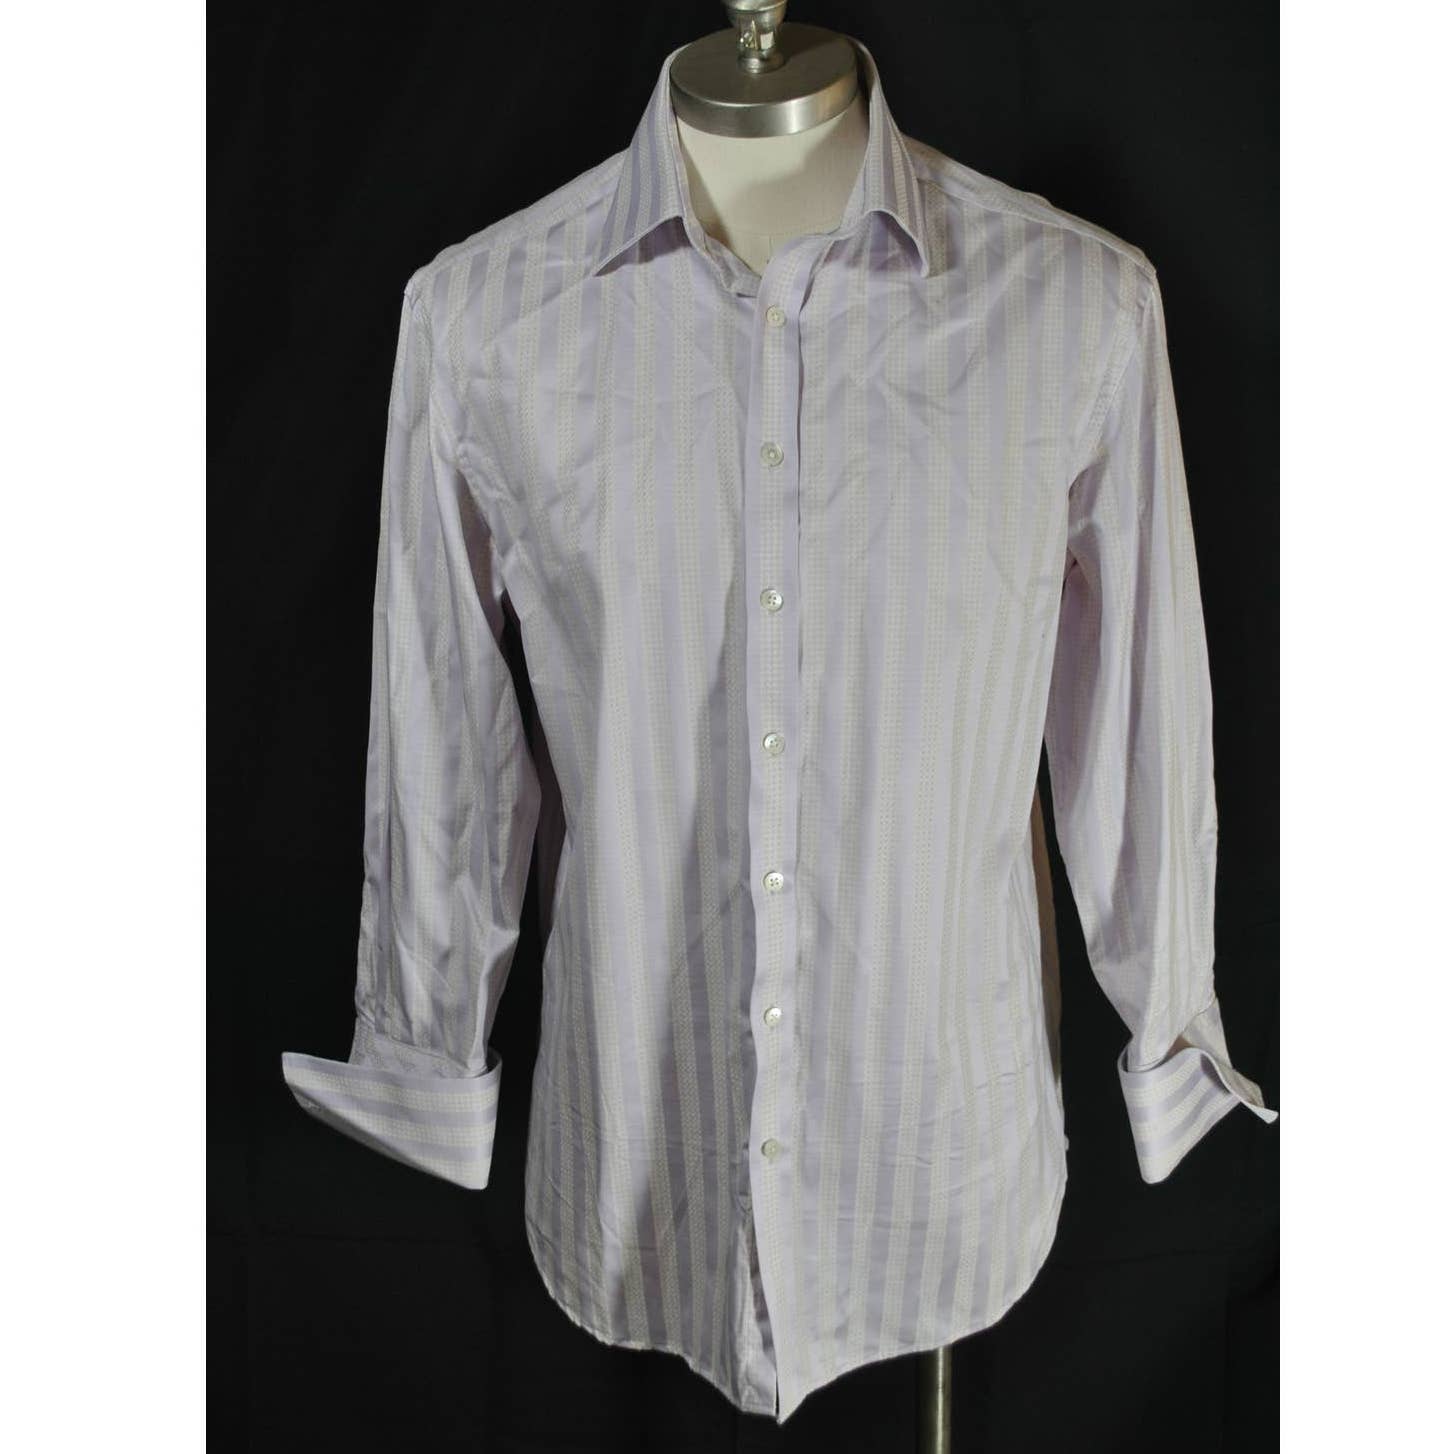 Ted Baker Lavender White French Cuff Button Up Shirt - 16.5 32/33